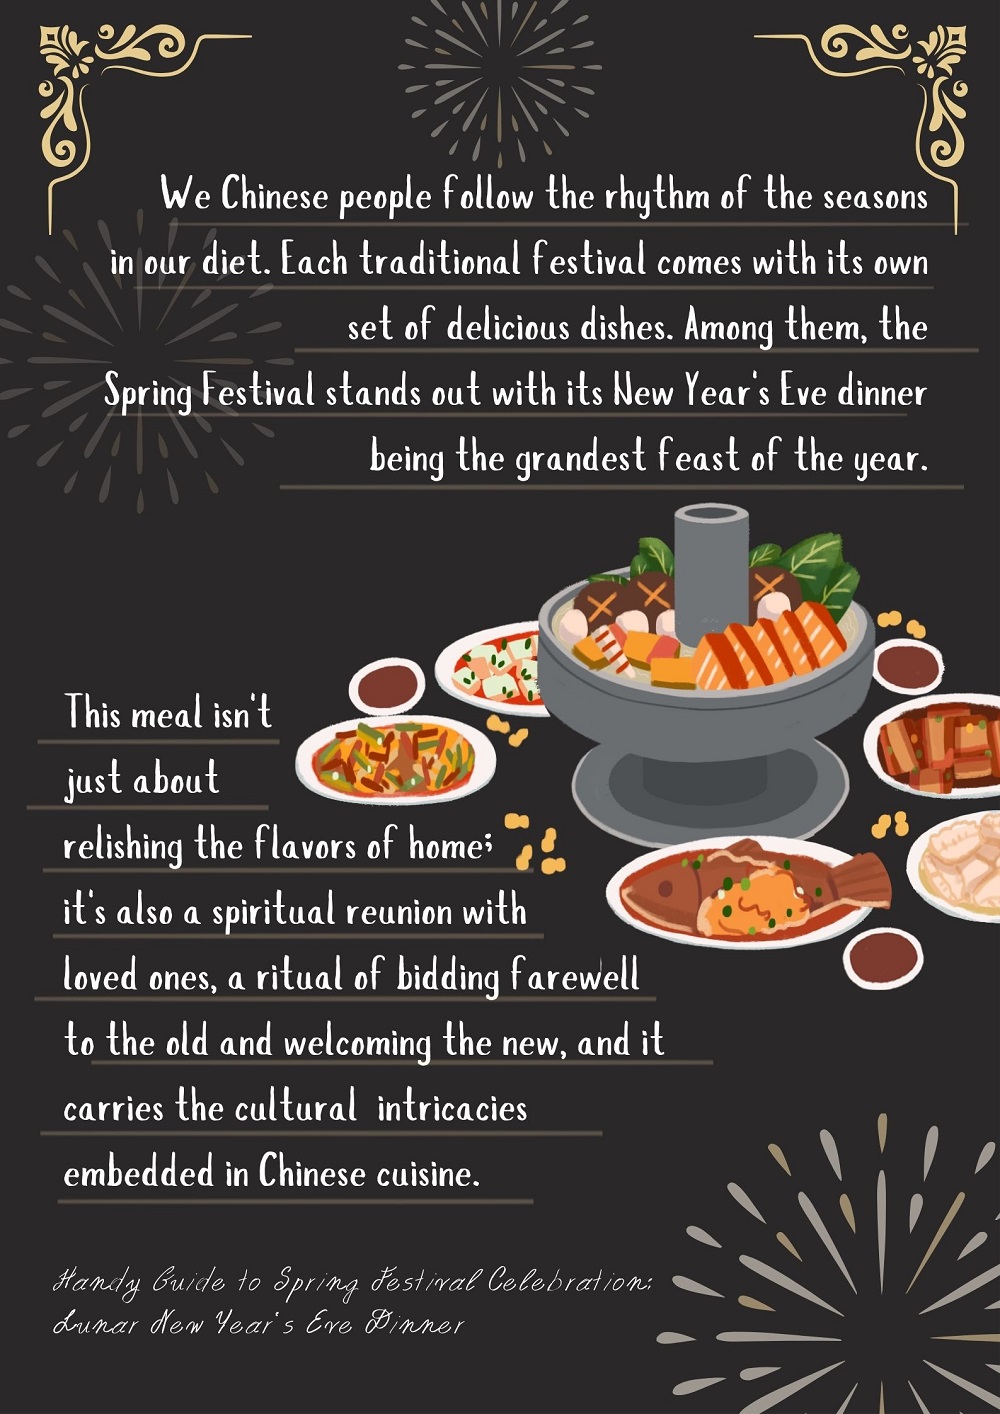 Handy Guide: What's on the Lunar New Year Dinner Table?